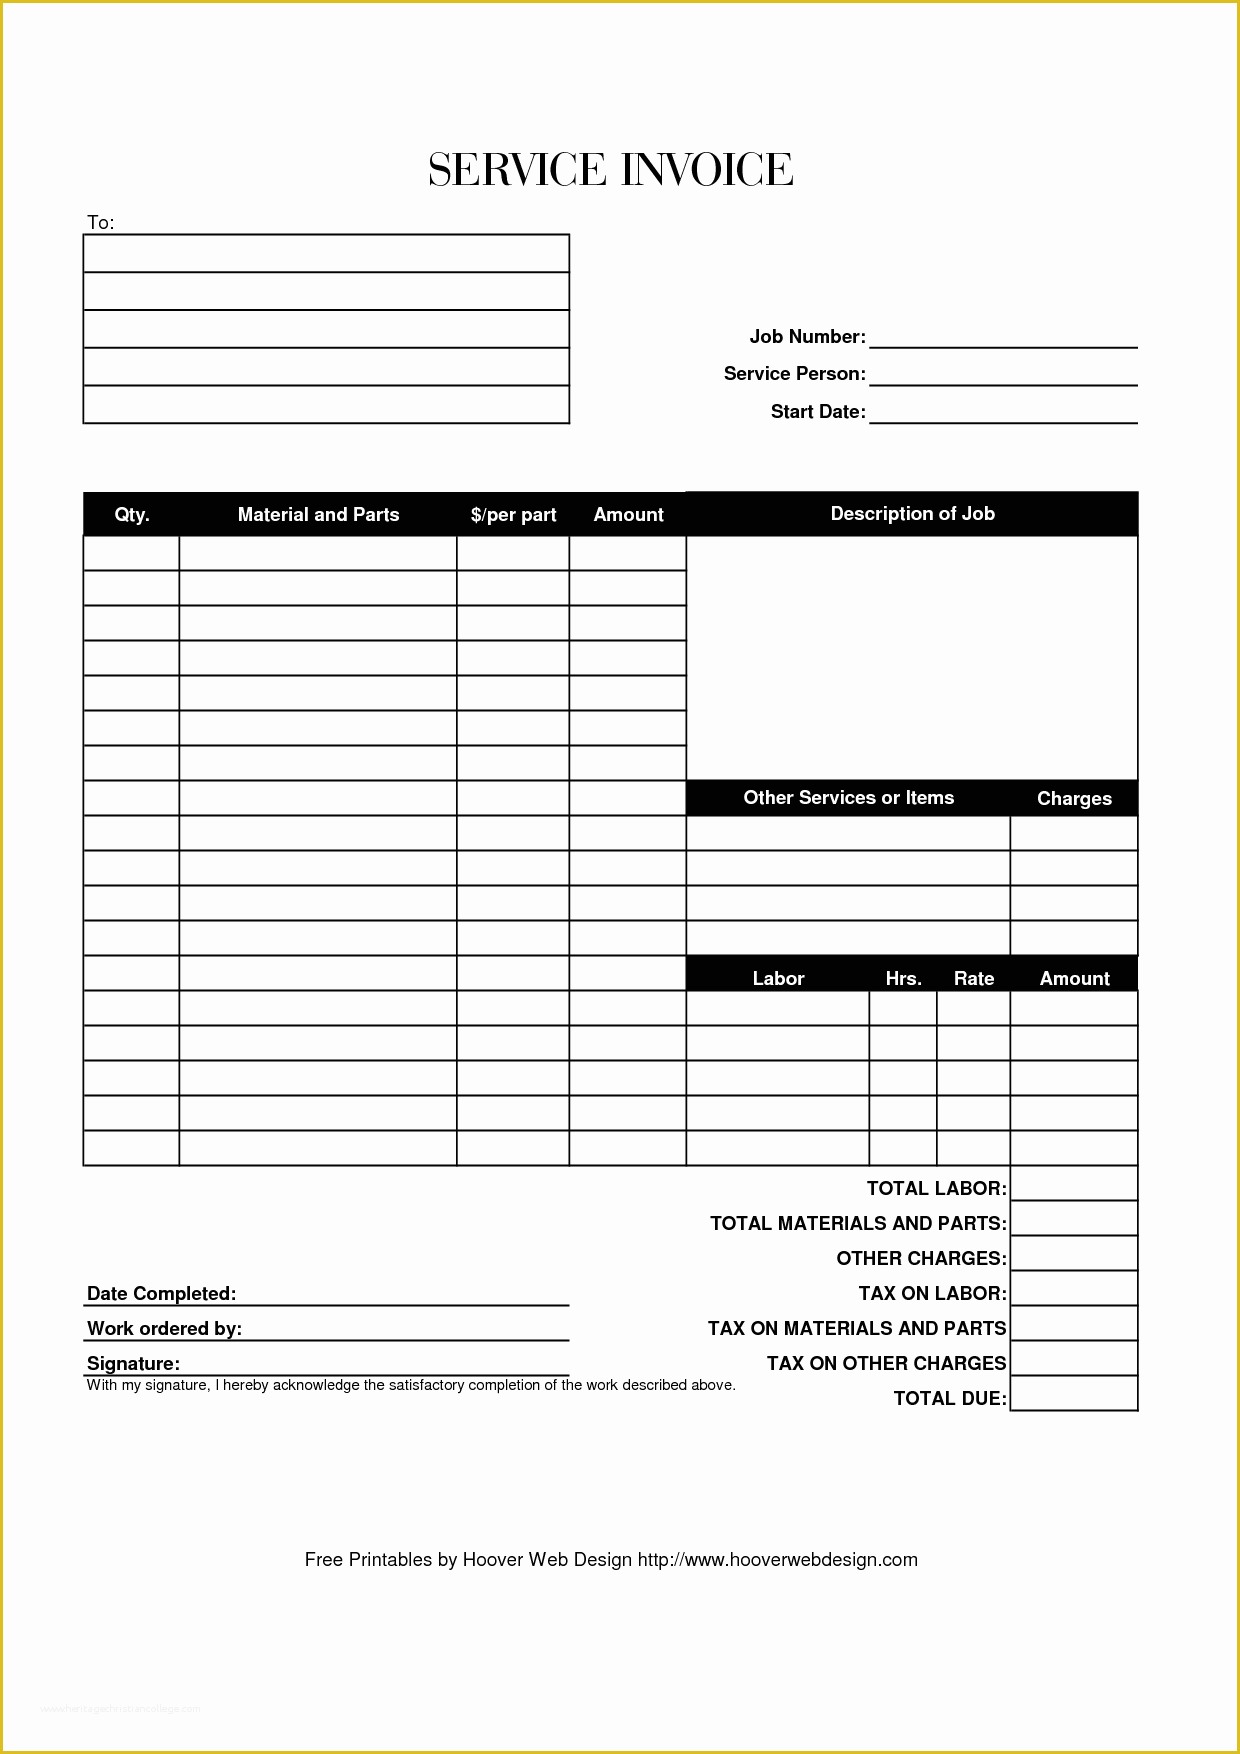 Free Company Invoice Template Of Hoover Receipts